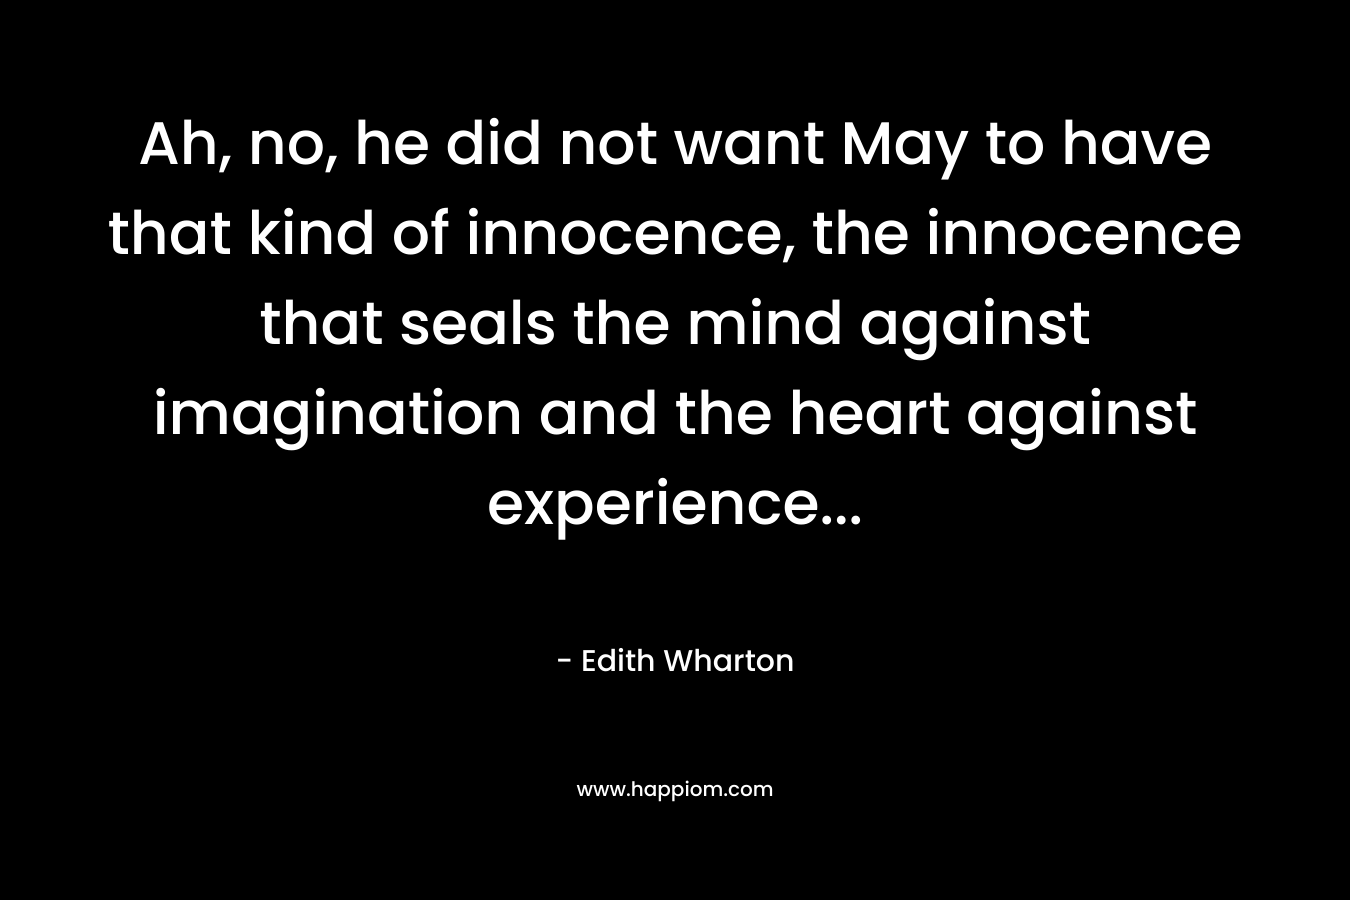 Ah, no, he did not want May to have that kind of innocence, the innocence that seals the mind against imagination and the heart against experience...